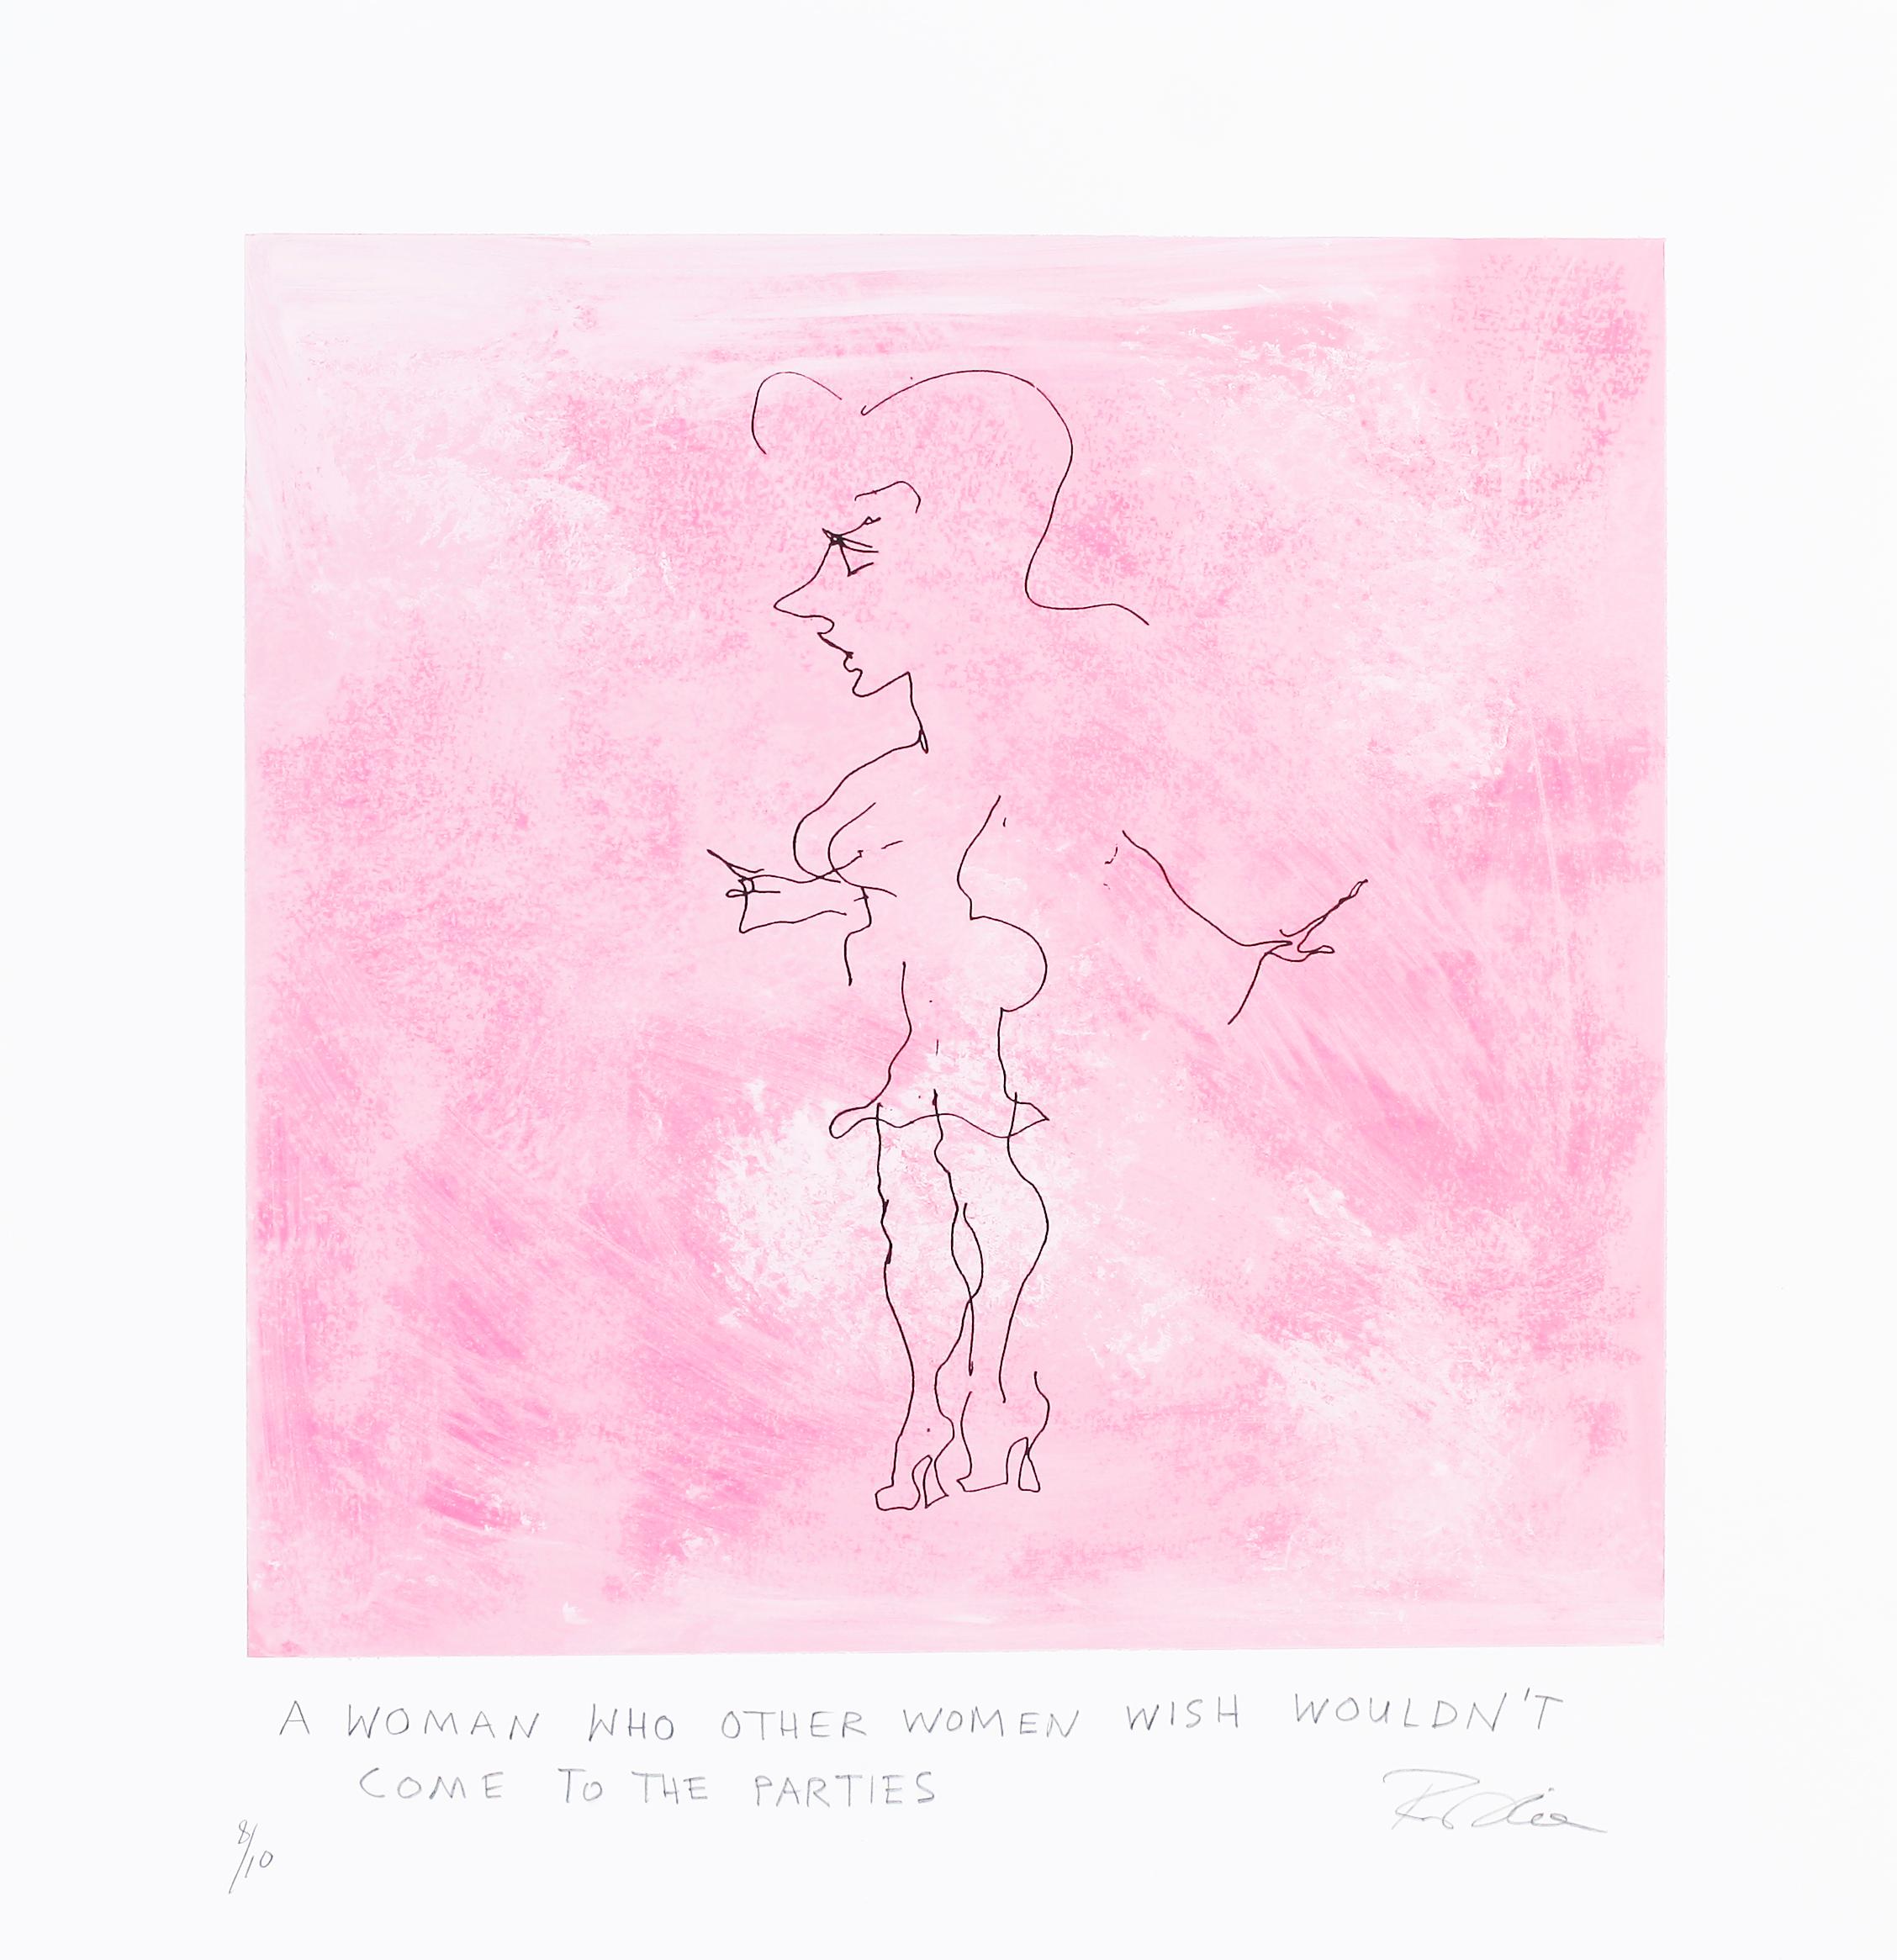 "A Woman Who Other Women Wish Wouldn't Come To The Parties" - Print by Rebecca Miller